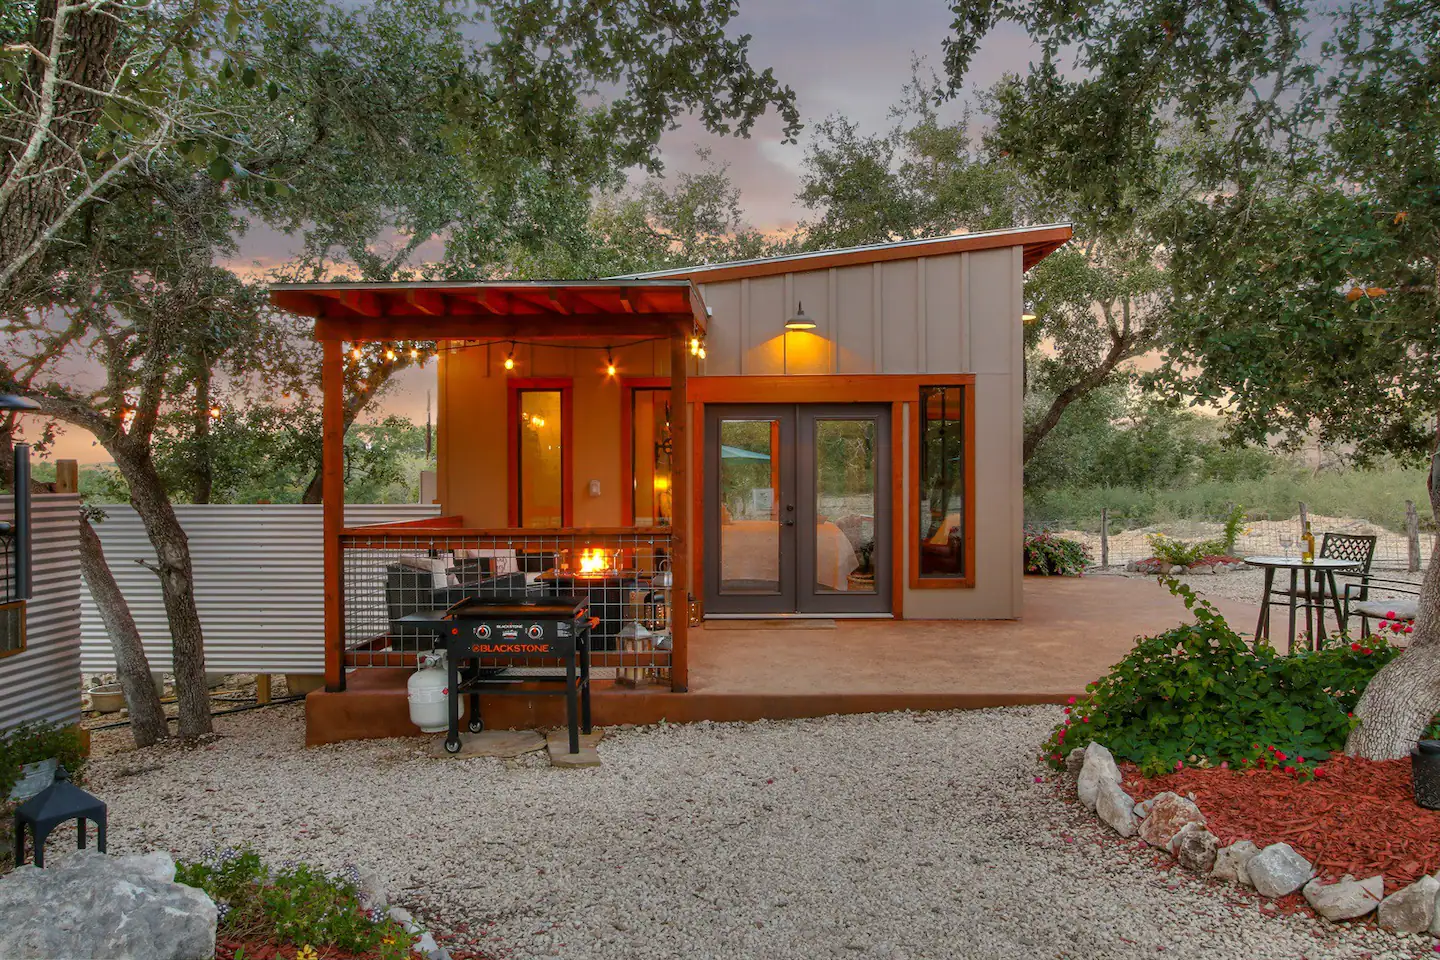 Relax, unwind and reconnect
Covered patio and wrap around porch
